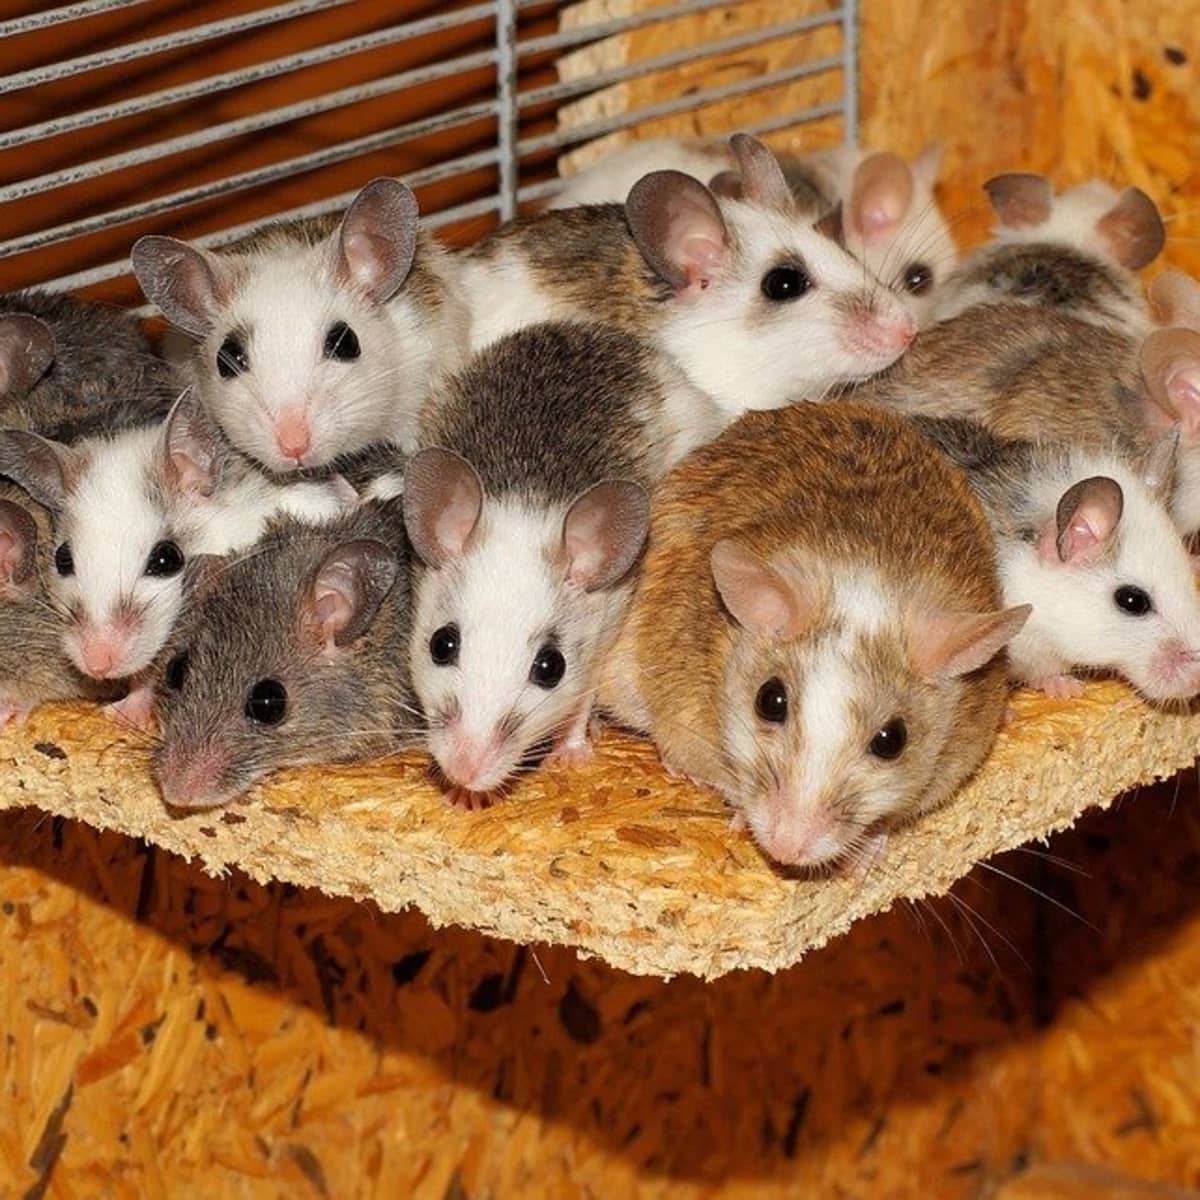 5 simple ways to get rid of mice without killing them